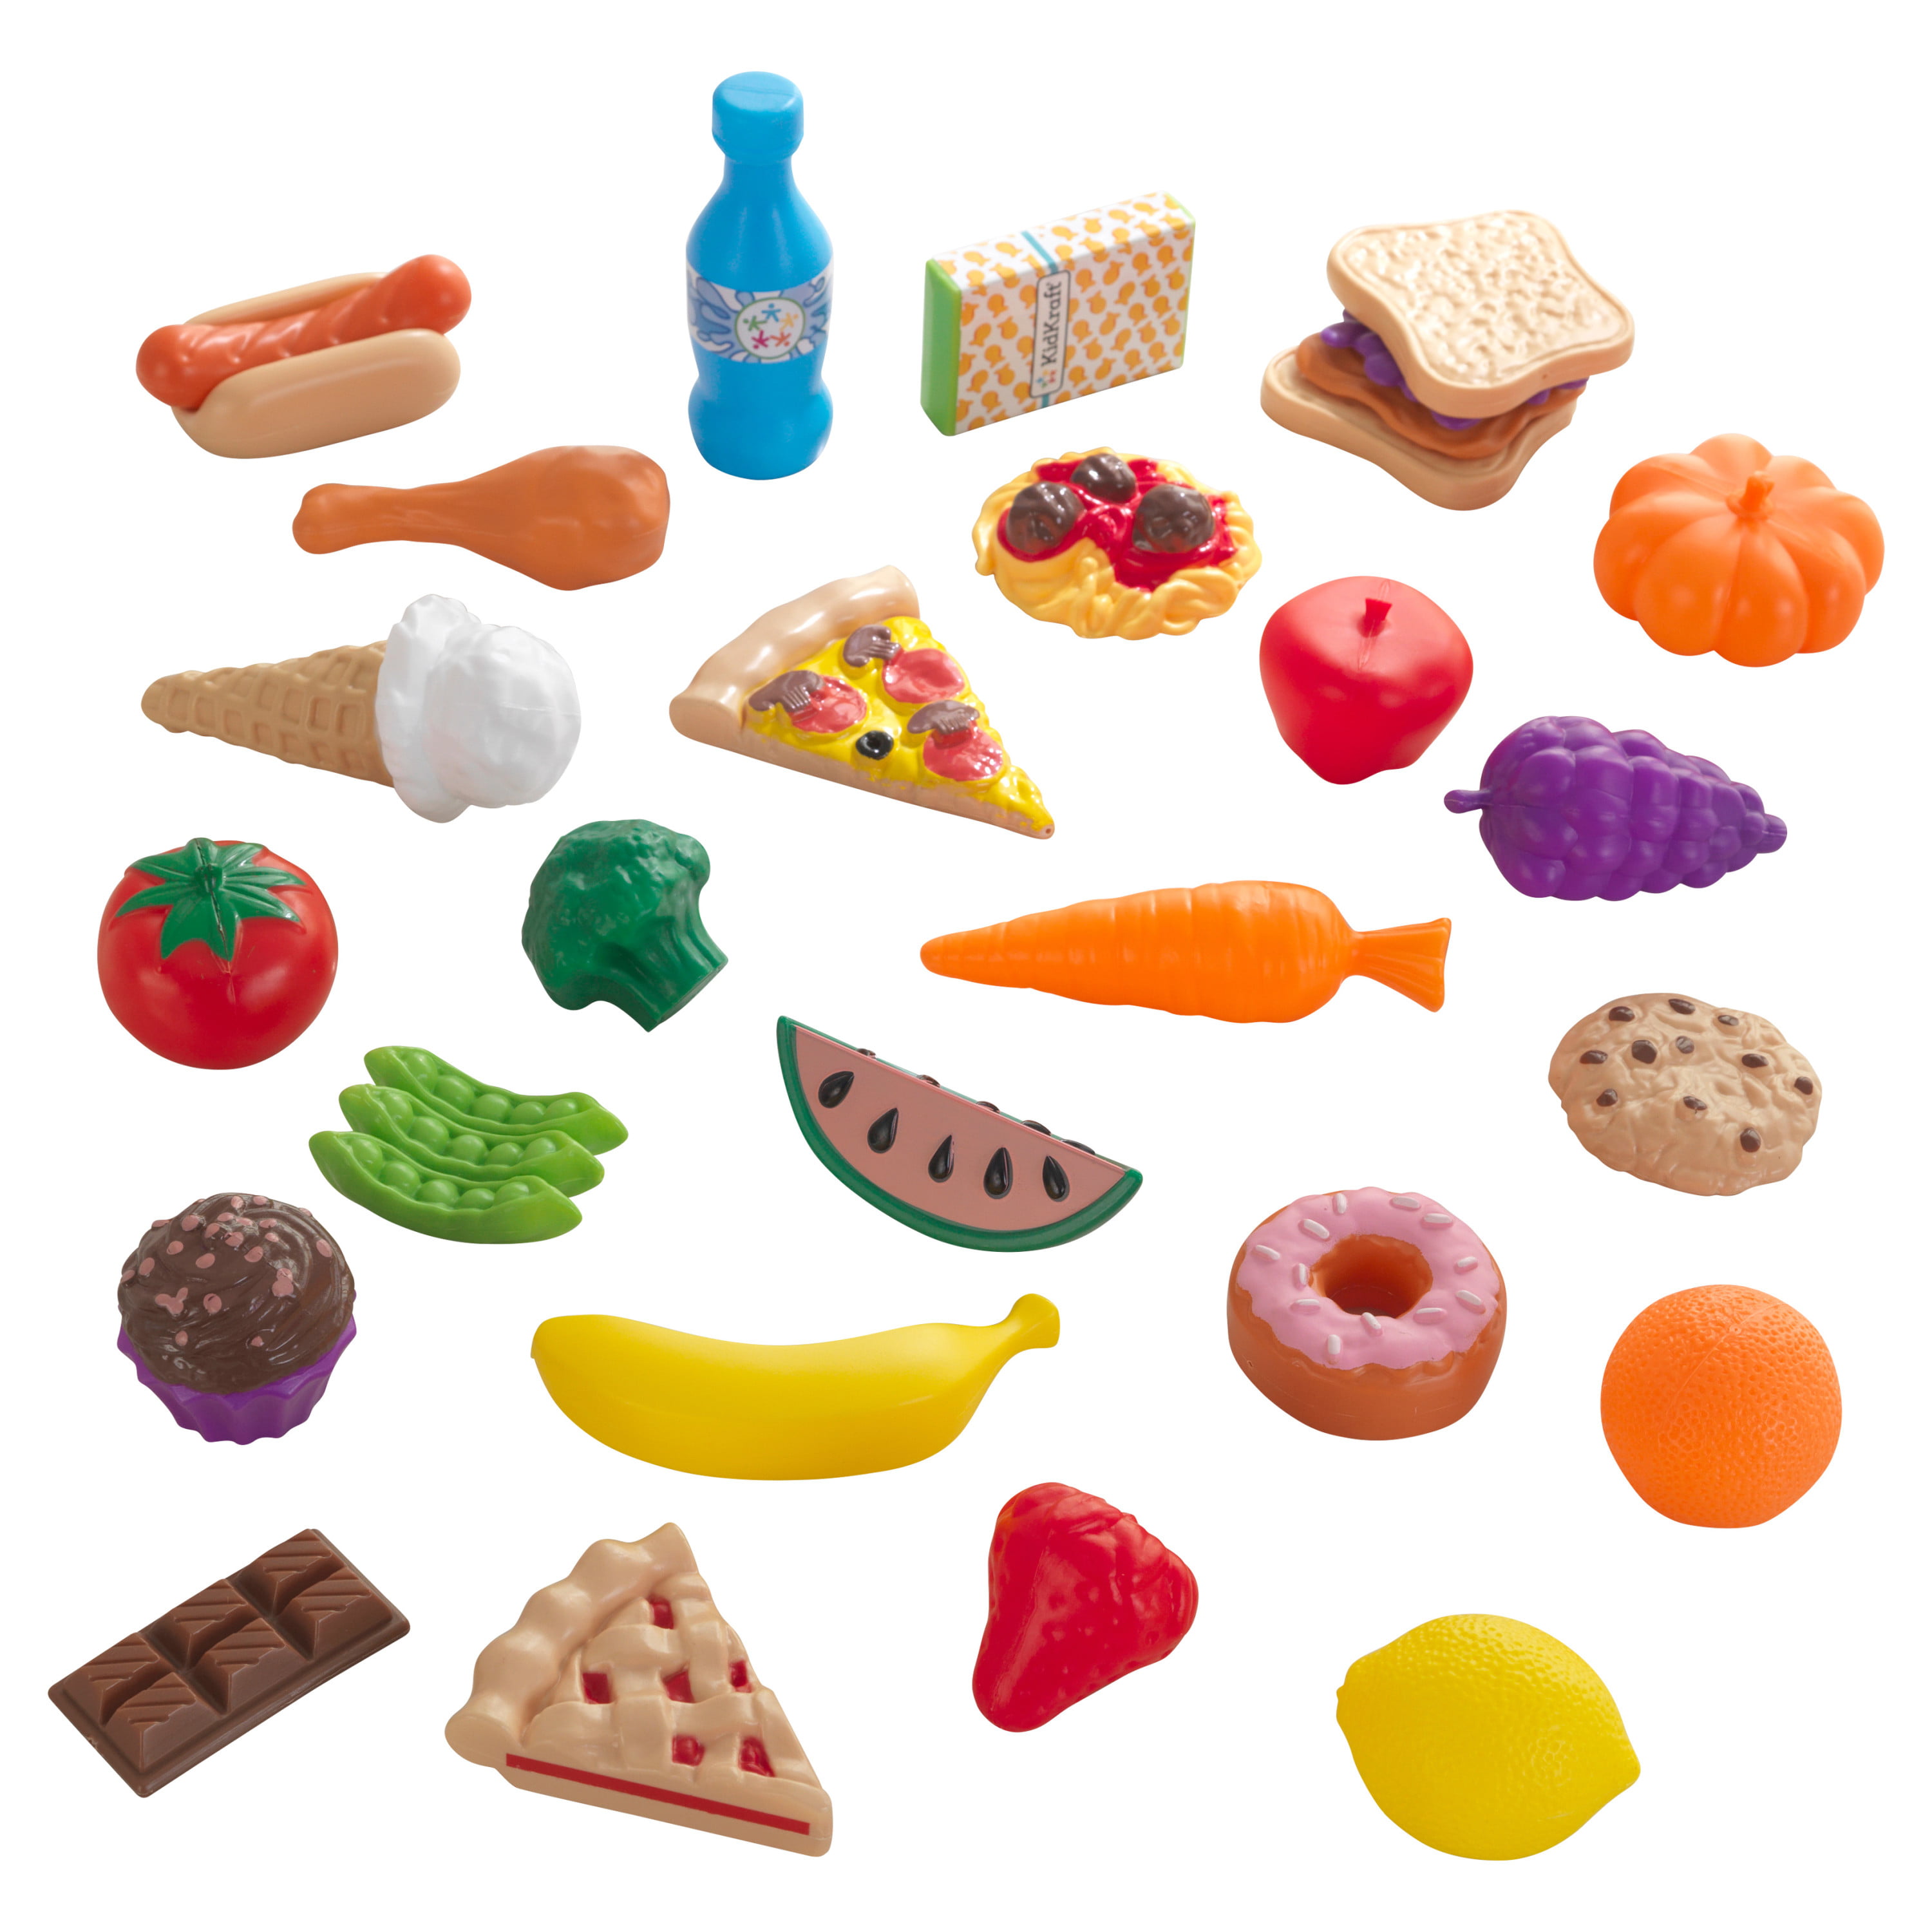 Food Groups Set Wooden Educational Toys Farm Toy Play Food Set 